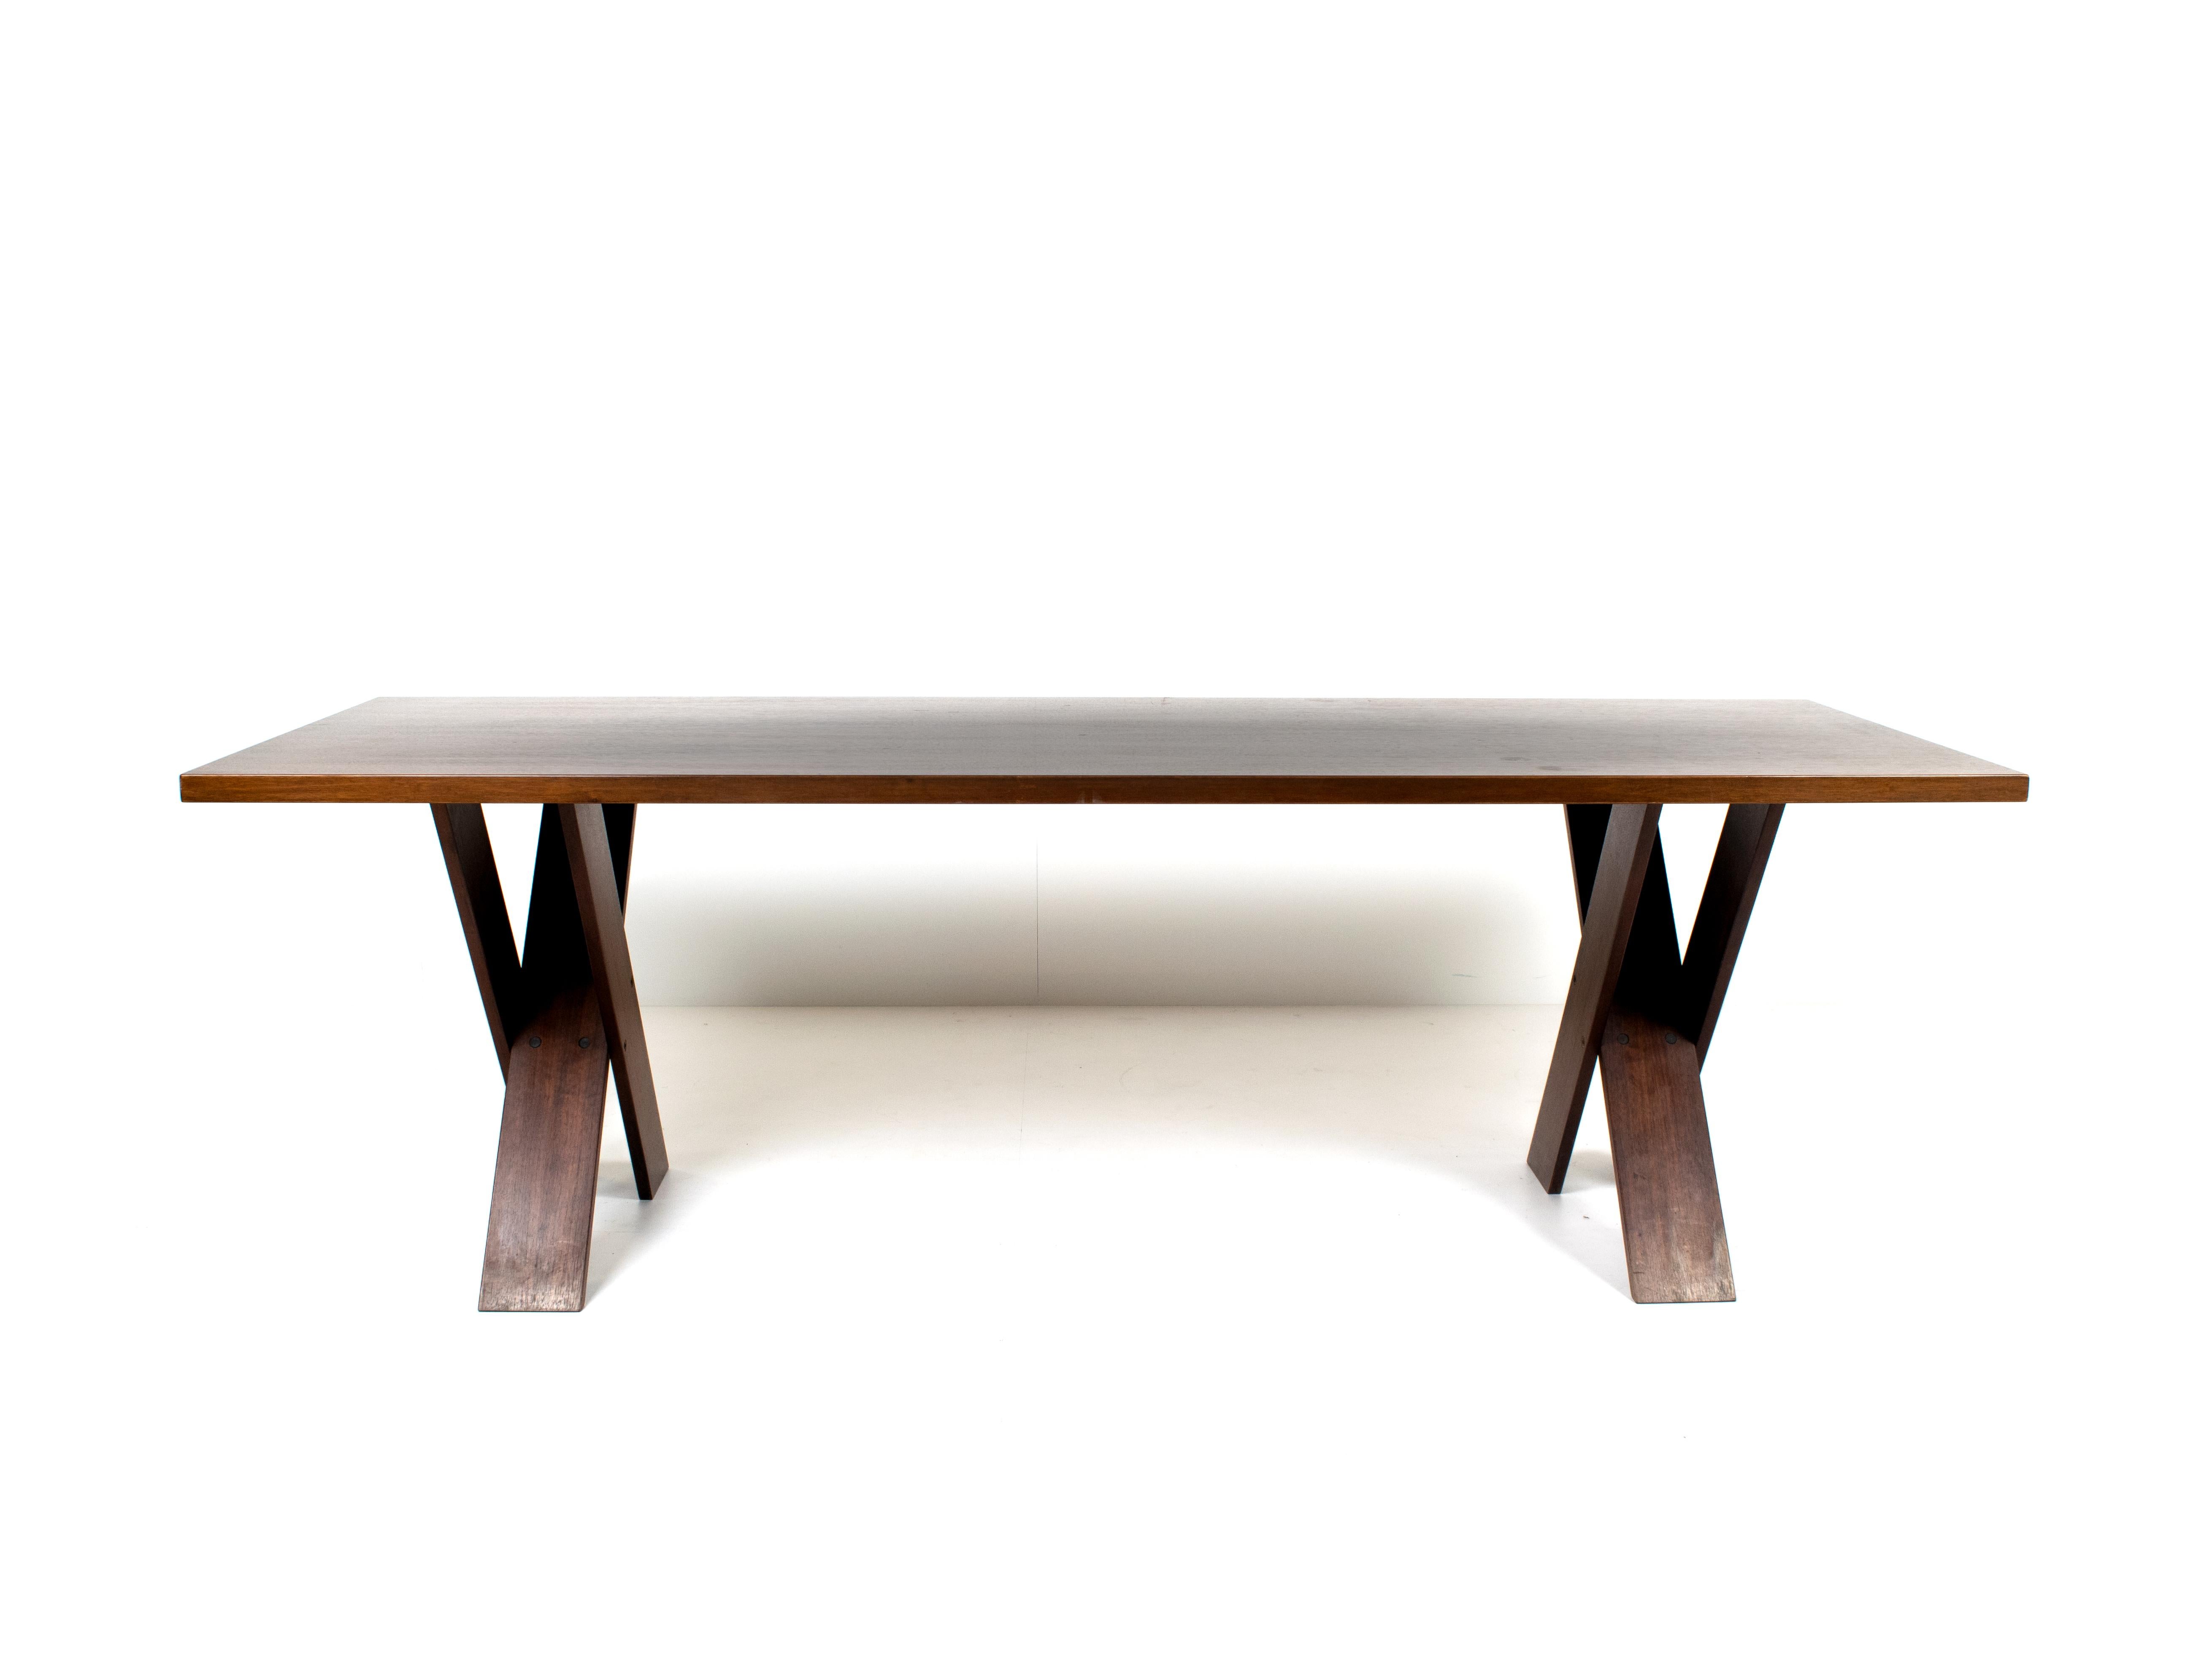 Rare Marco Zanuso walnut dining table TL 58 for Poggi, Italy 1970s. This table has double X-legs, combining architecture and minimalism. The dark polished walnut gives it a warm and more traditional feel. Marco Zanuso was a designer and an